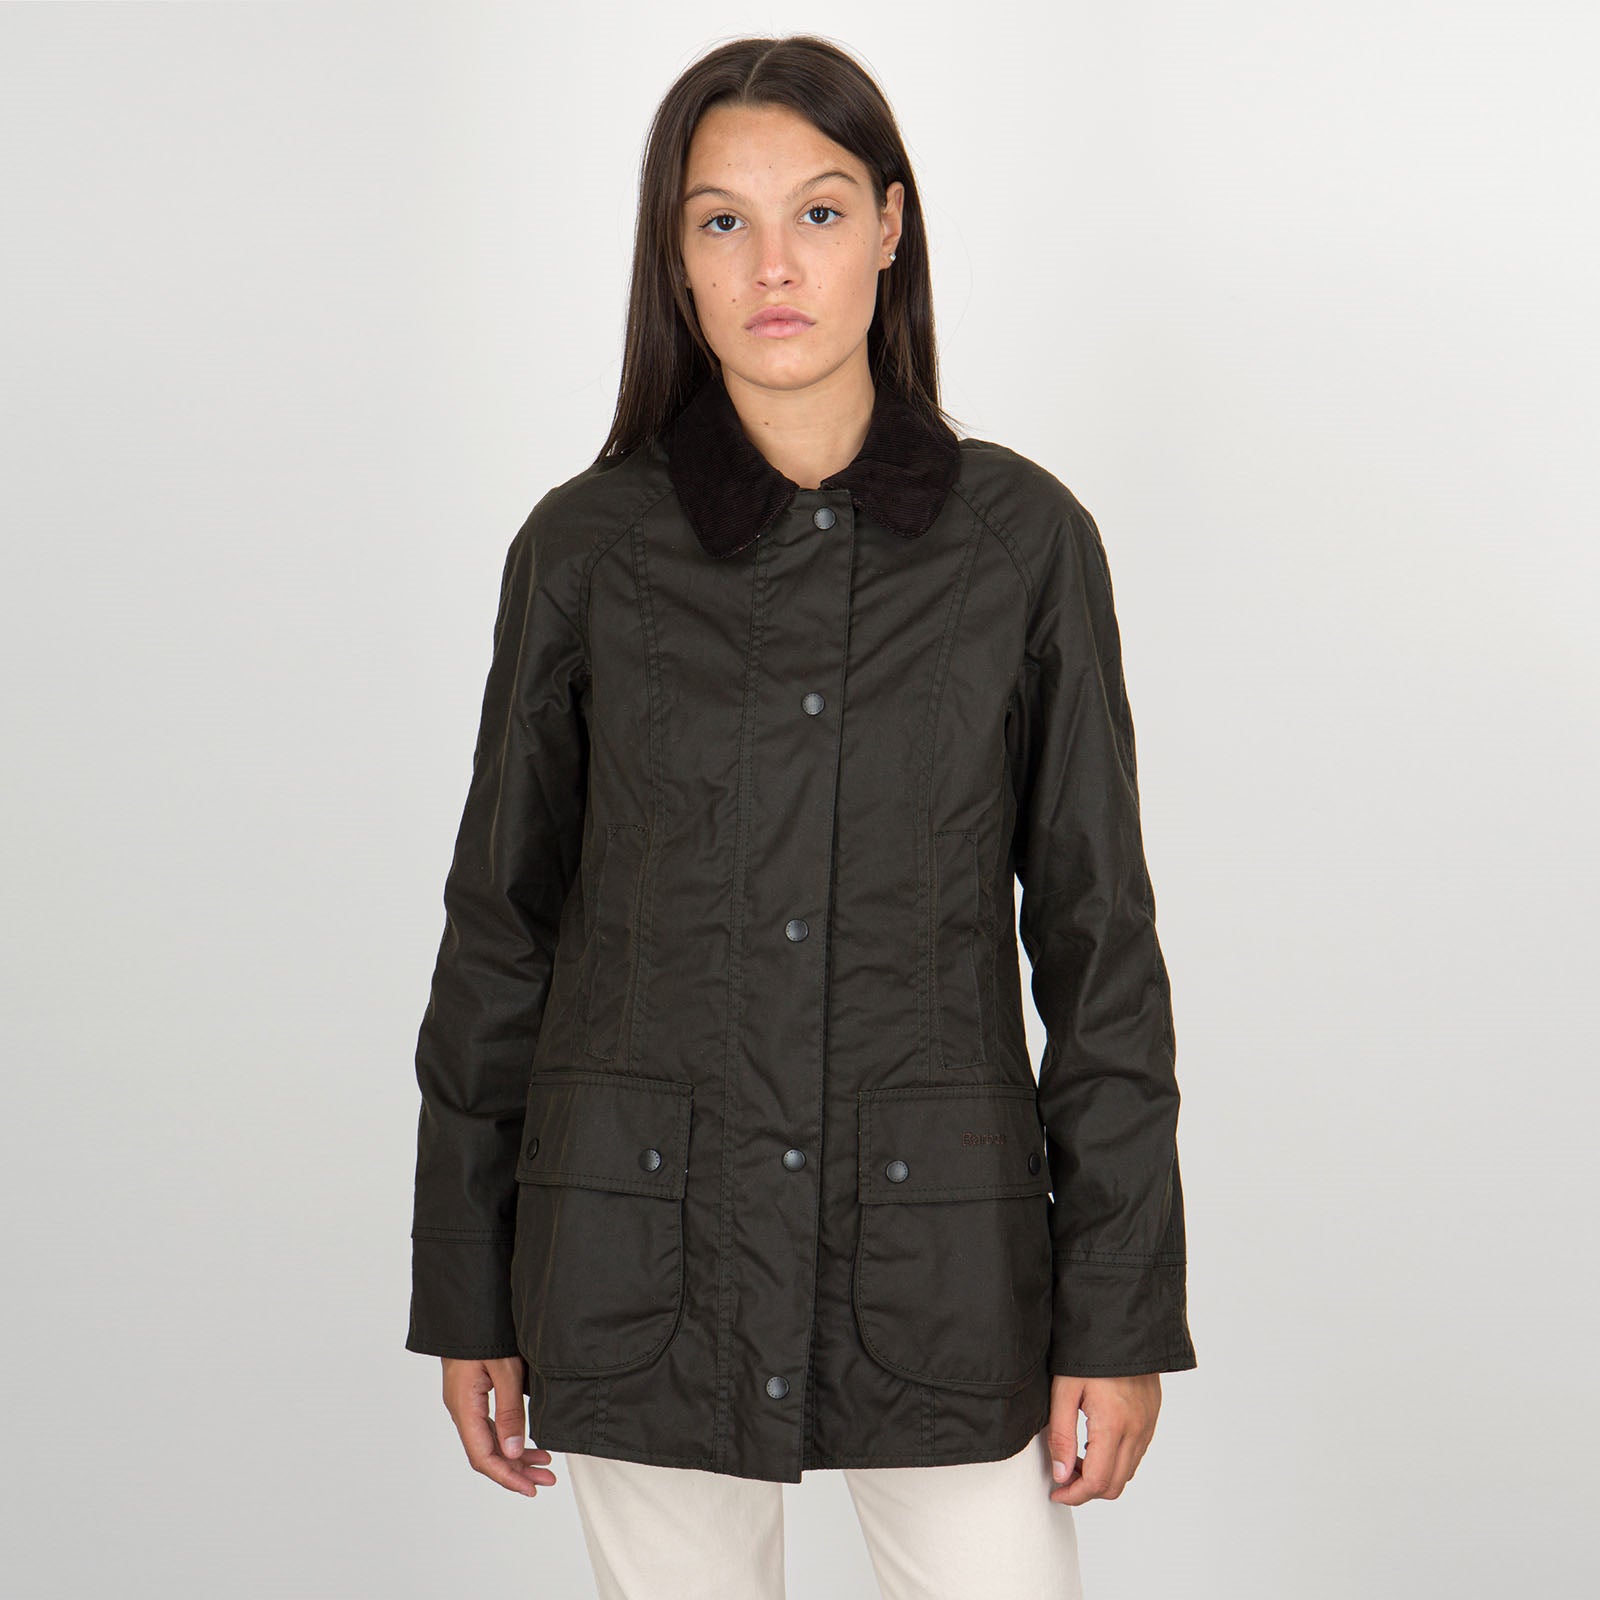 Barbour Giubbotto Beadnell Wax Olive Verde Oliva Donna - 10